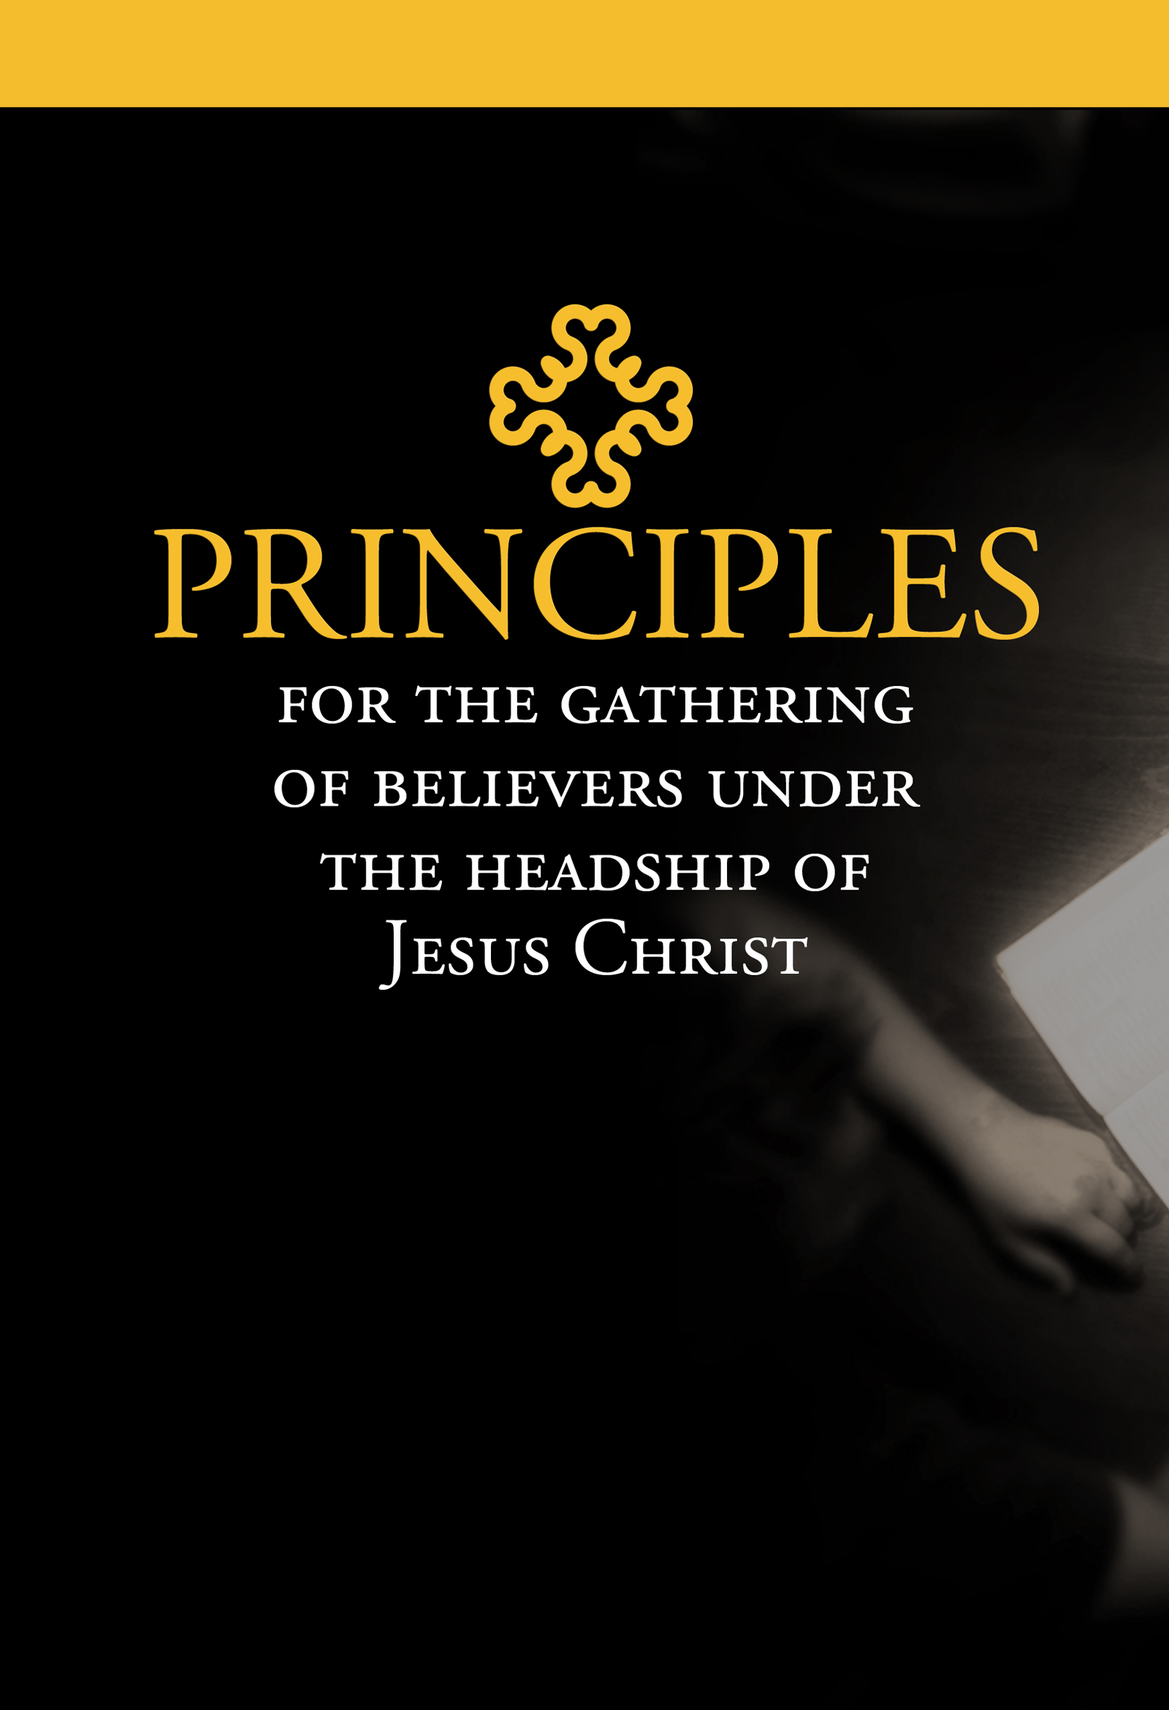 Principles for the Gathering of Believers Under the Headship of Jesus Christ